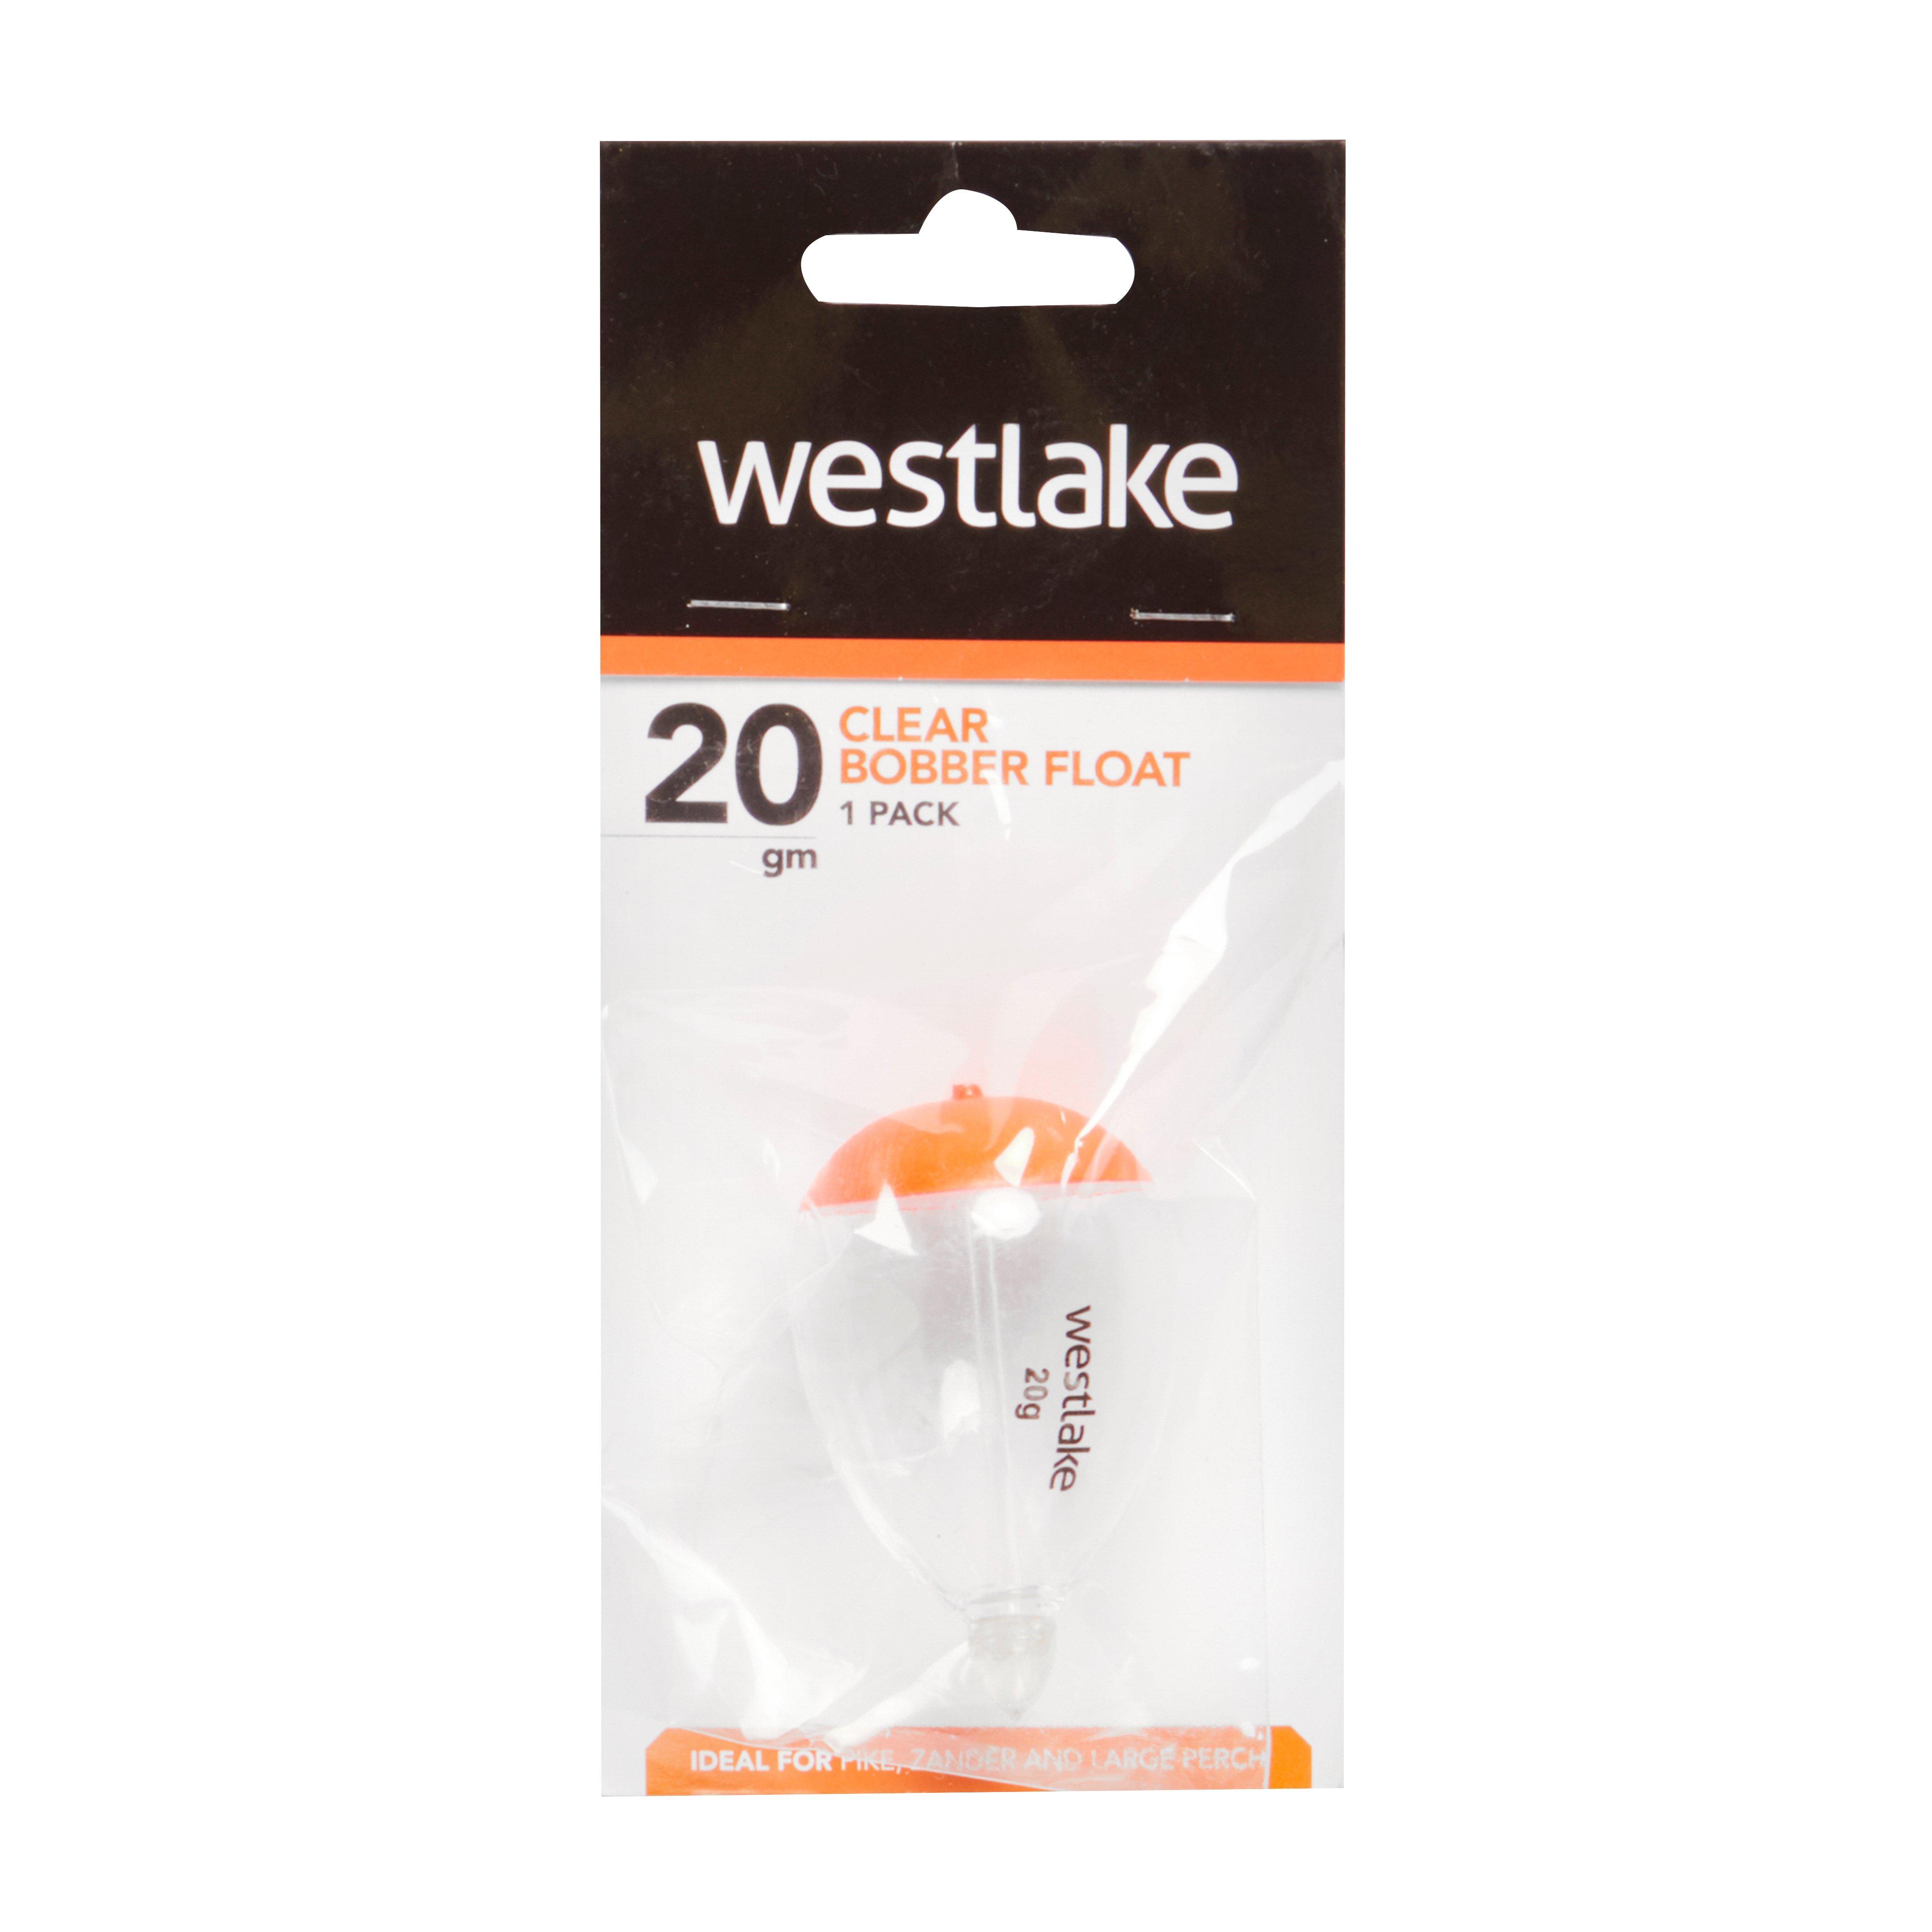 Westlake Clear Pike Bob Float 20G Review